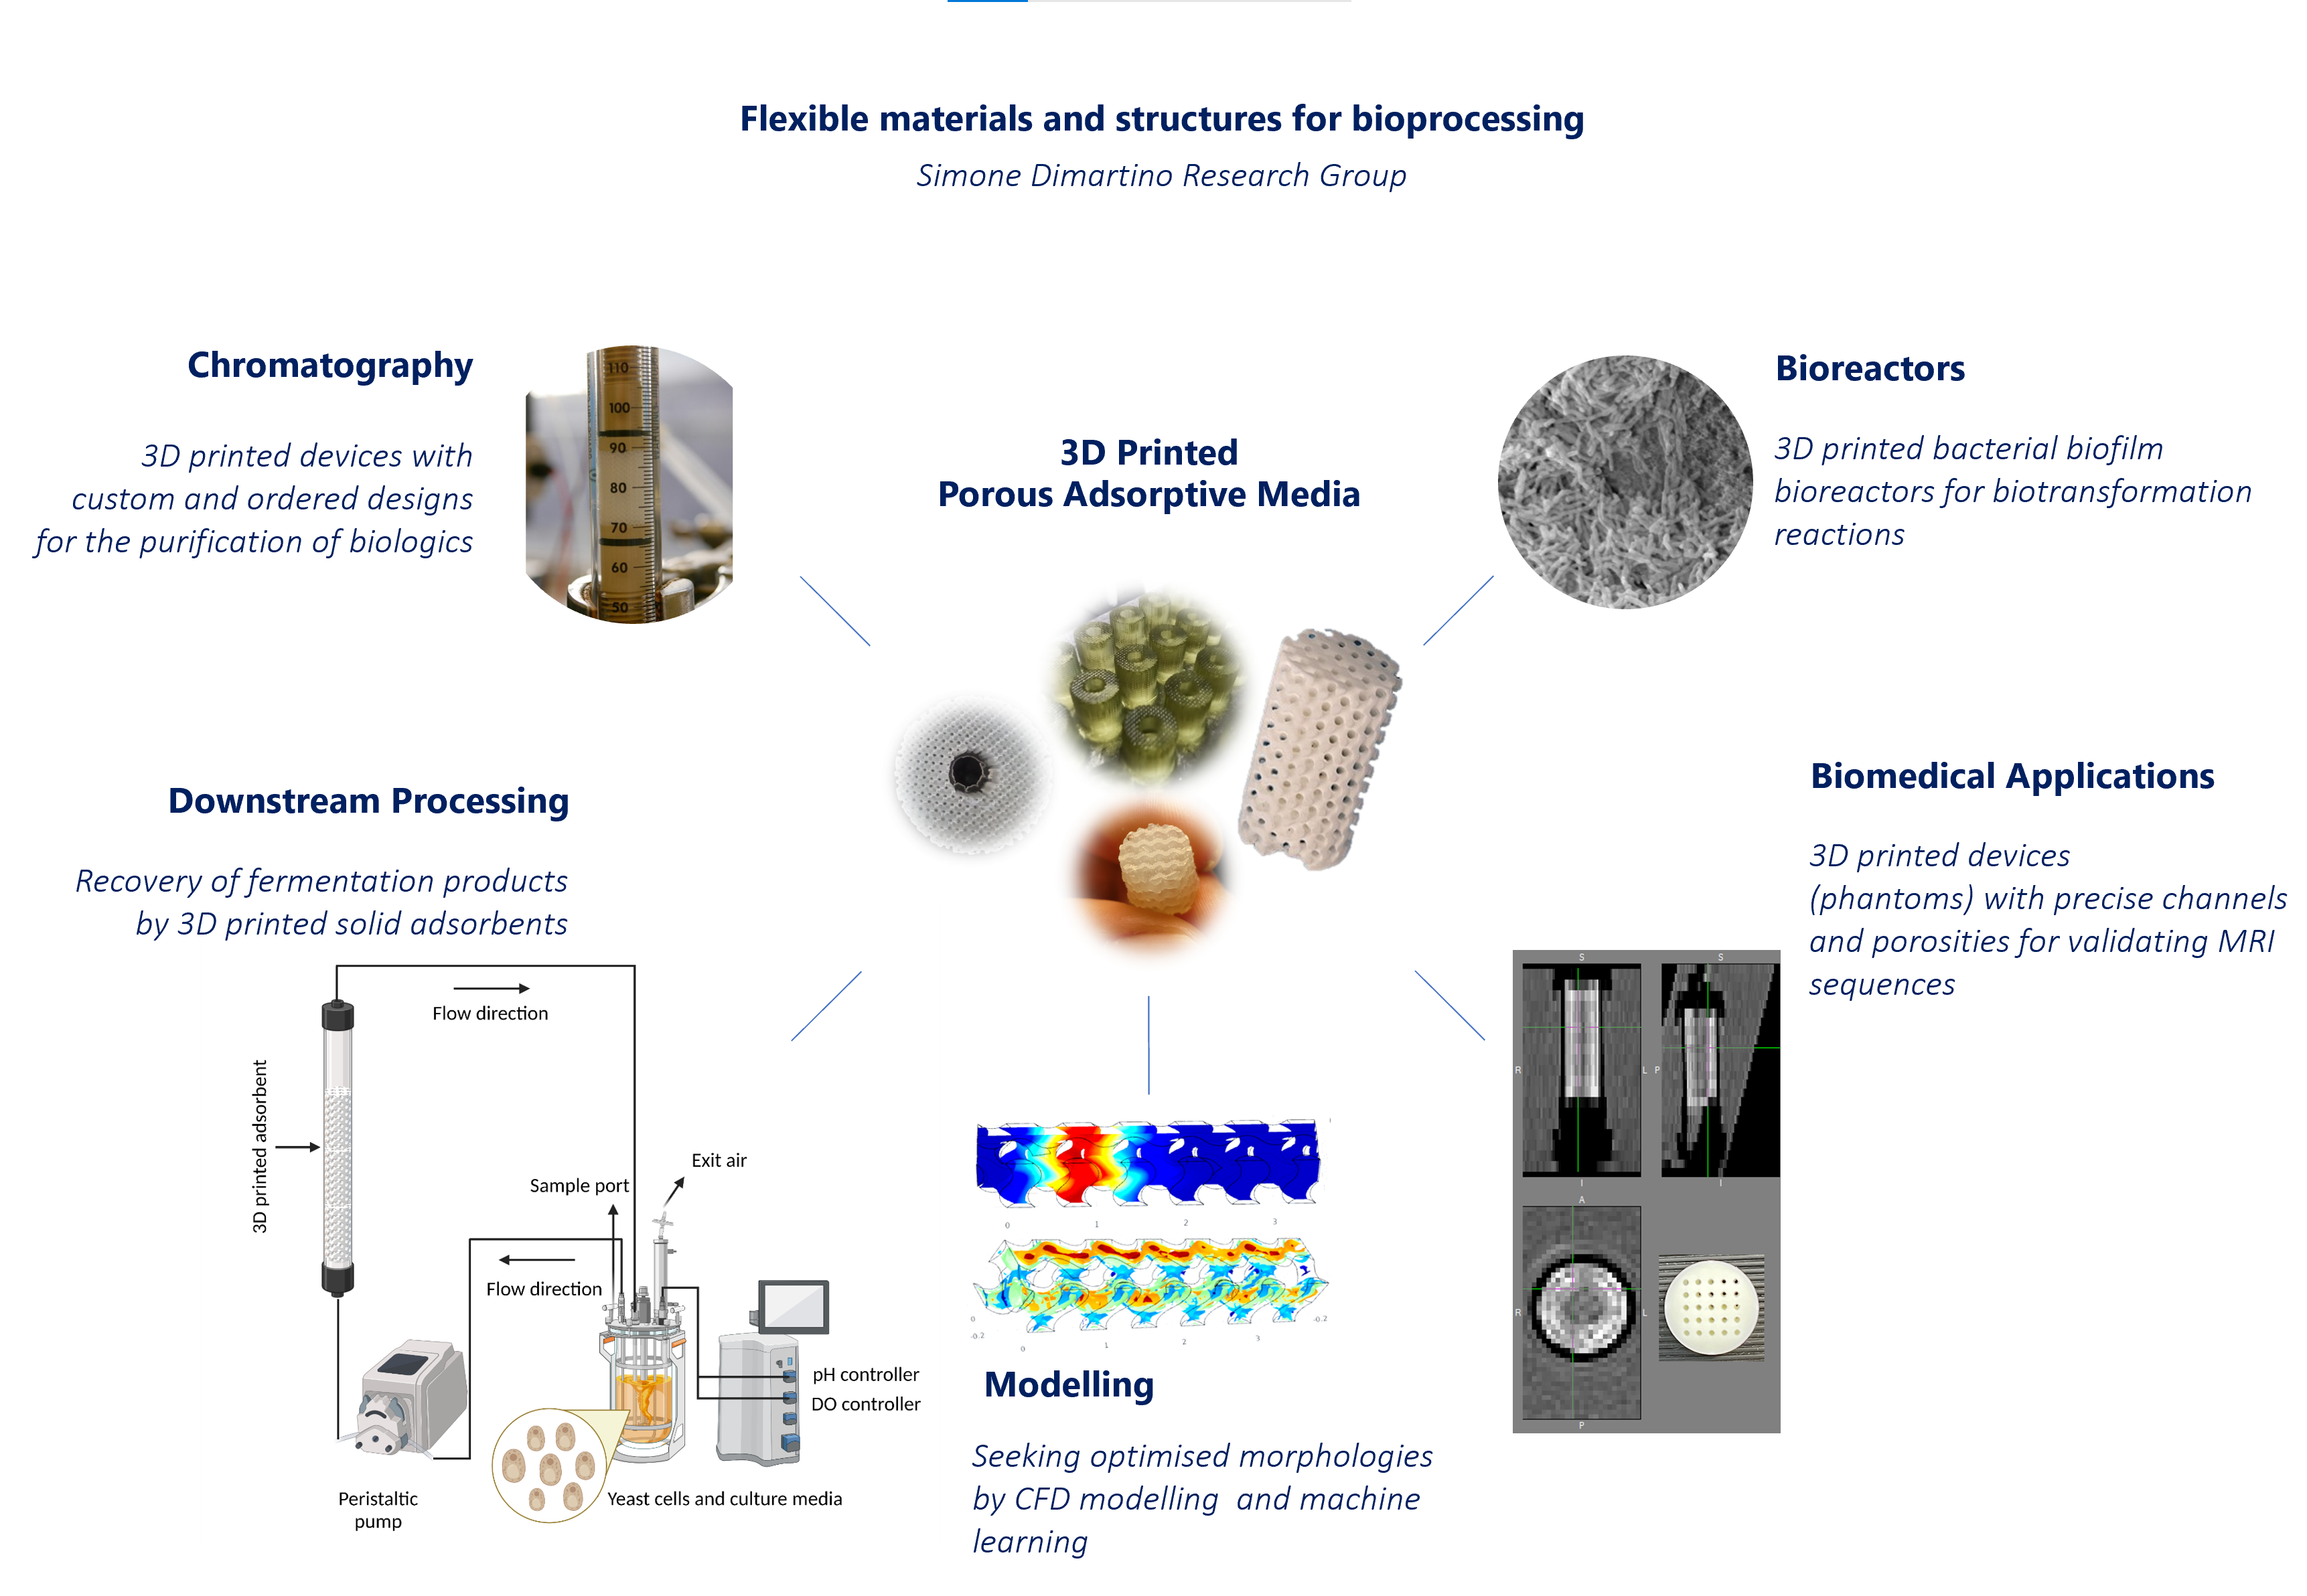 Image showing 3D Printed Porous Adsorptive Media applications